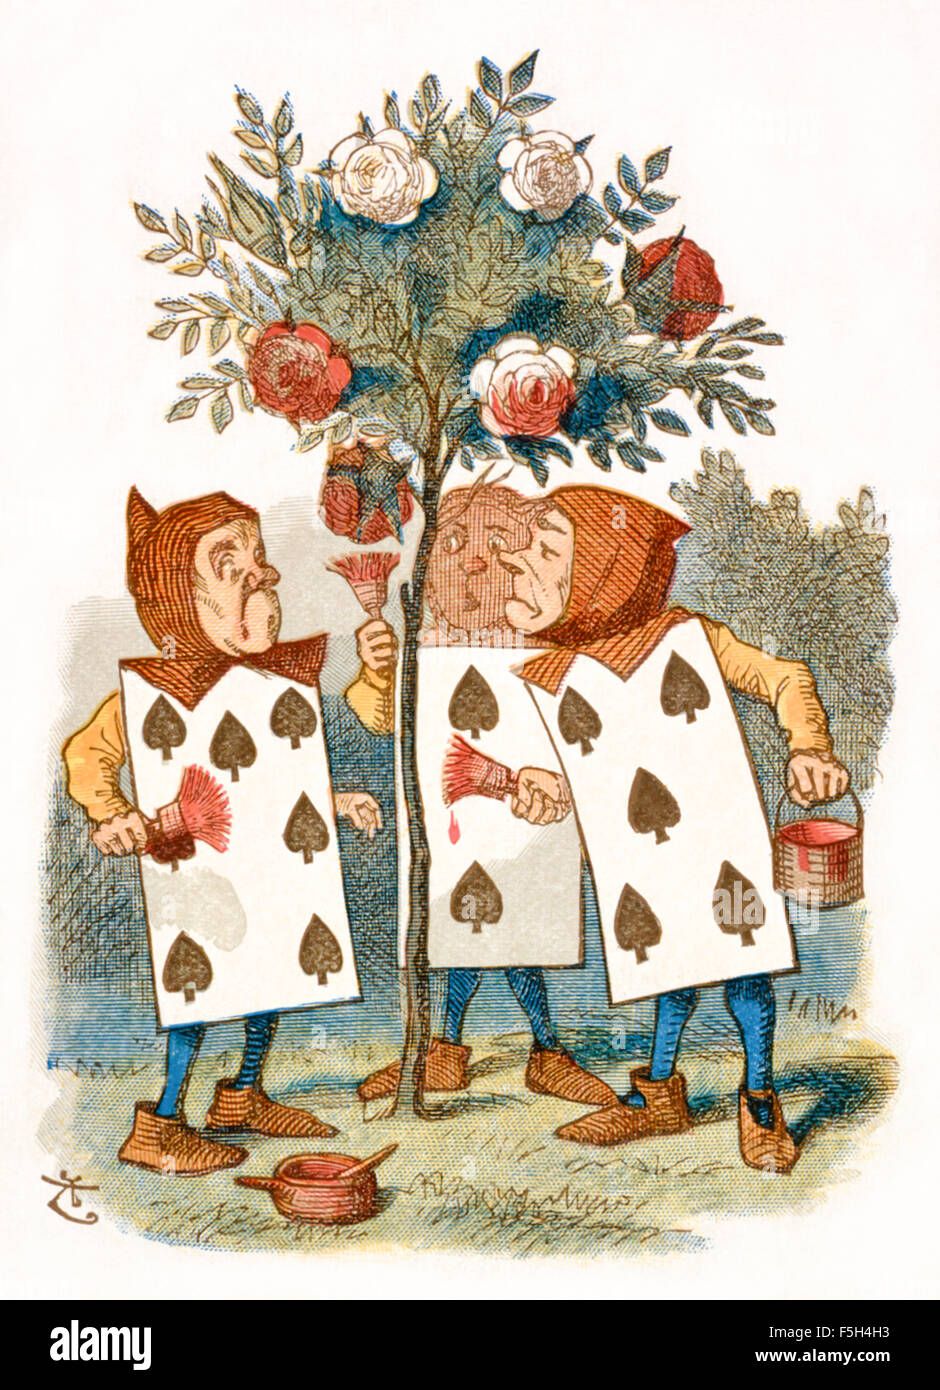 The Queen's gardeners painting the roses red, from 'The Nursery “Alice'', an shortened adaptation of ‘Alice’s Adventures in Wonderland’ aimed at under-fives written by Lewis Carroll (1832-1898) himself. This edition contains 20 selected illustrations by Sir John Tenniel (1820-1914) from the original book which were enlarged and coloured by Emily Gertrude Thomson (1850-1929). See description for more information. Stock Photo